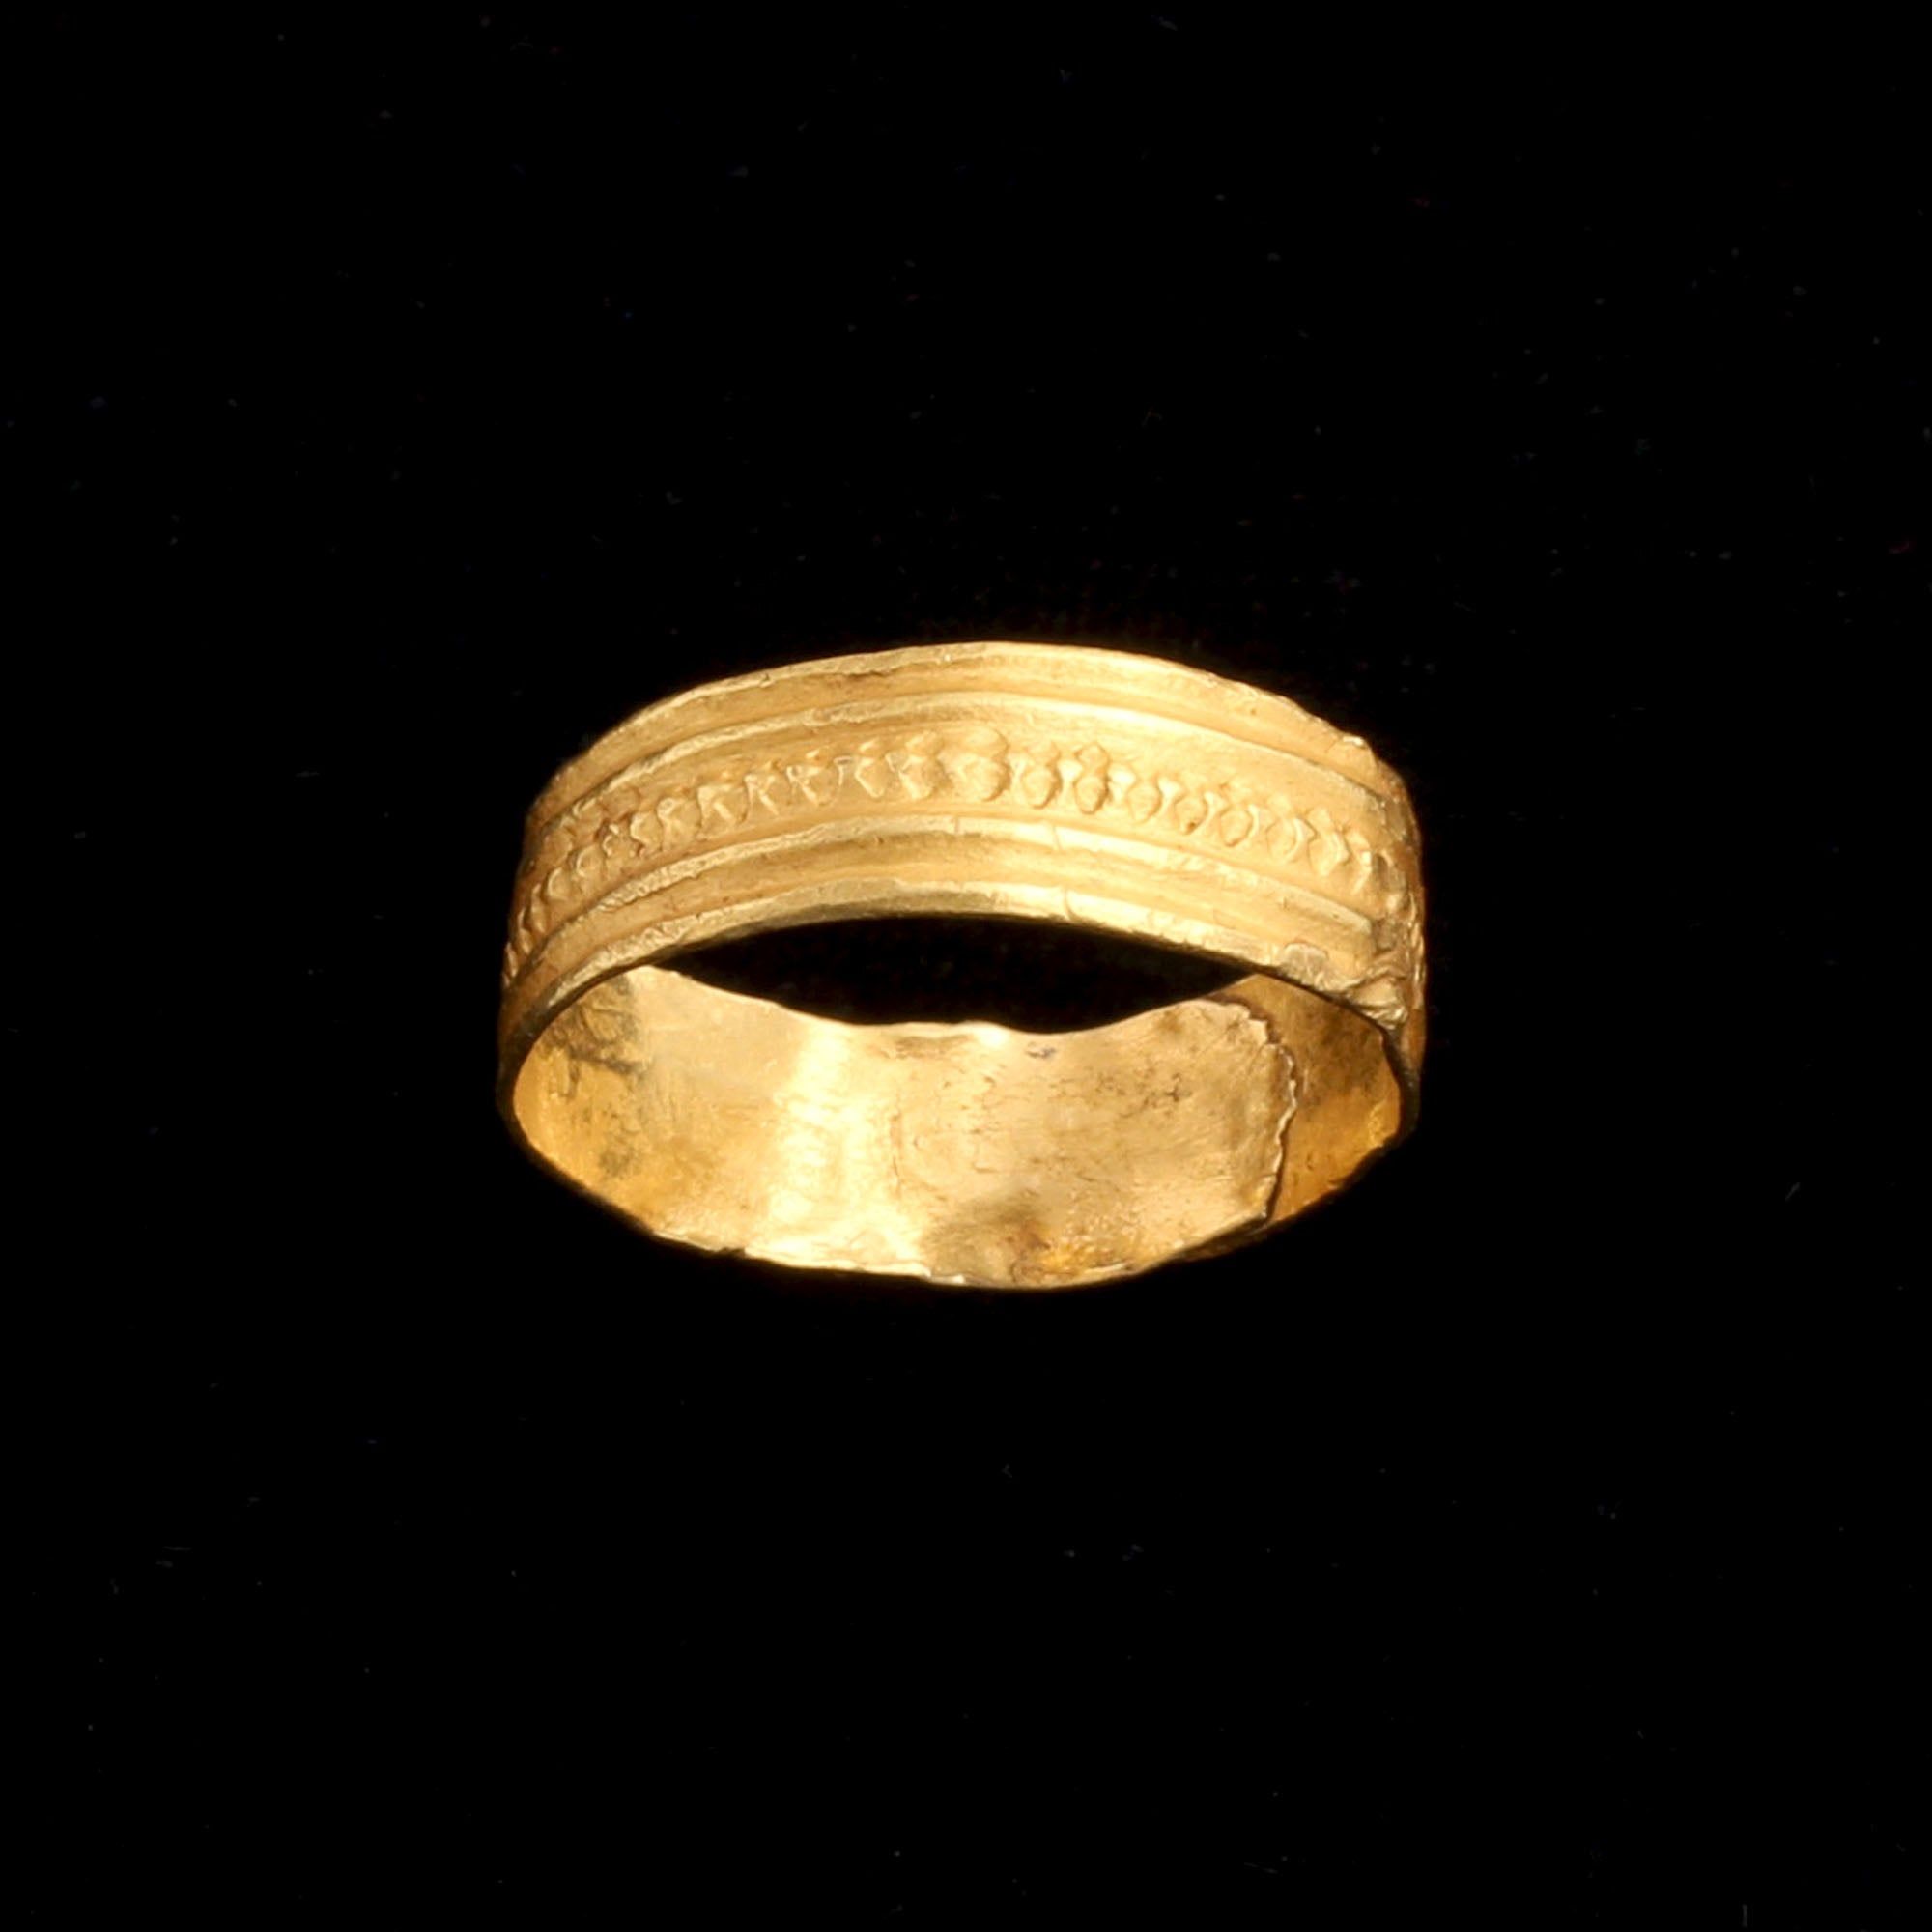 Early Medieval Patterned Gold Band